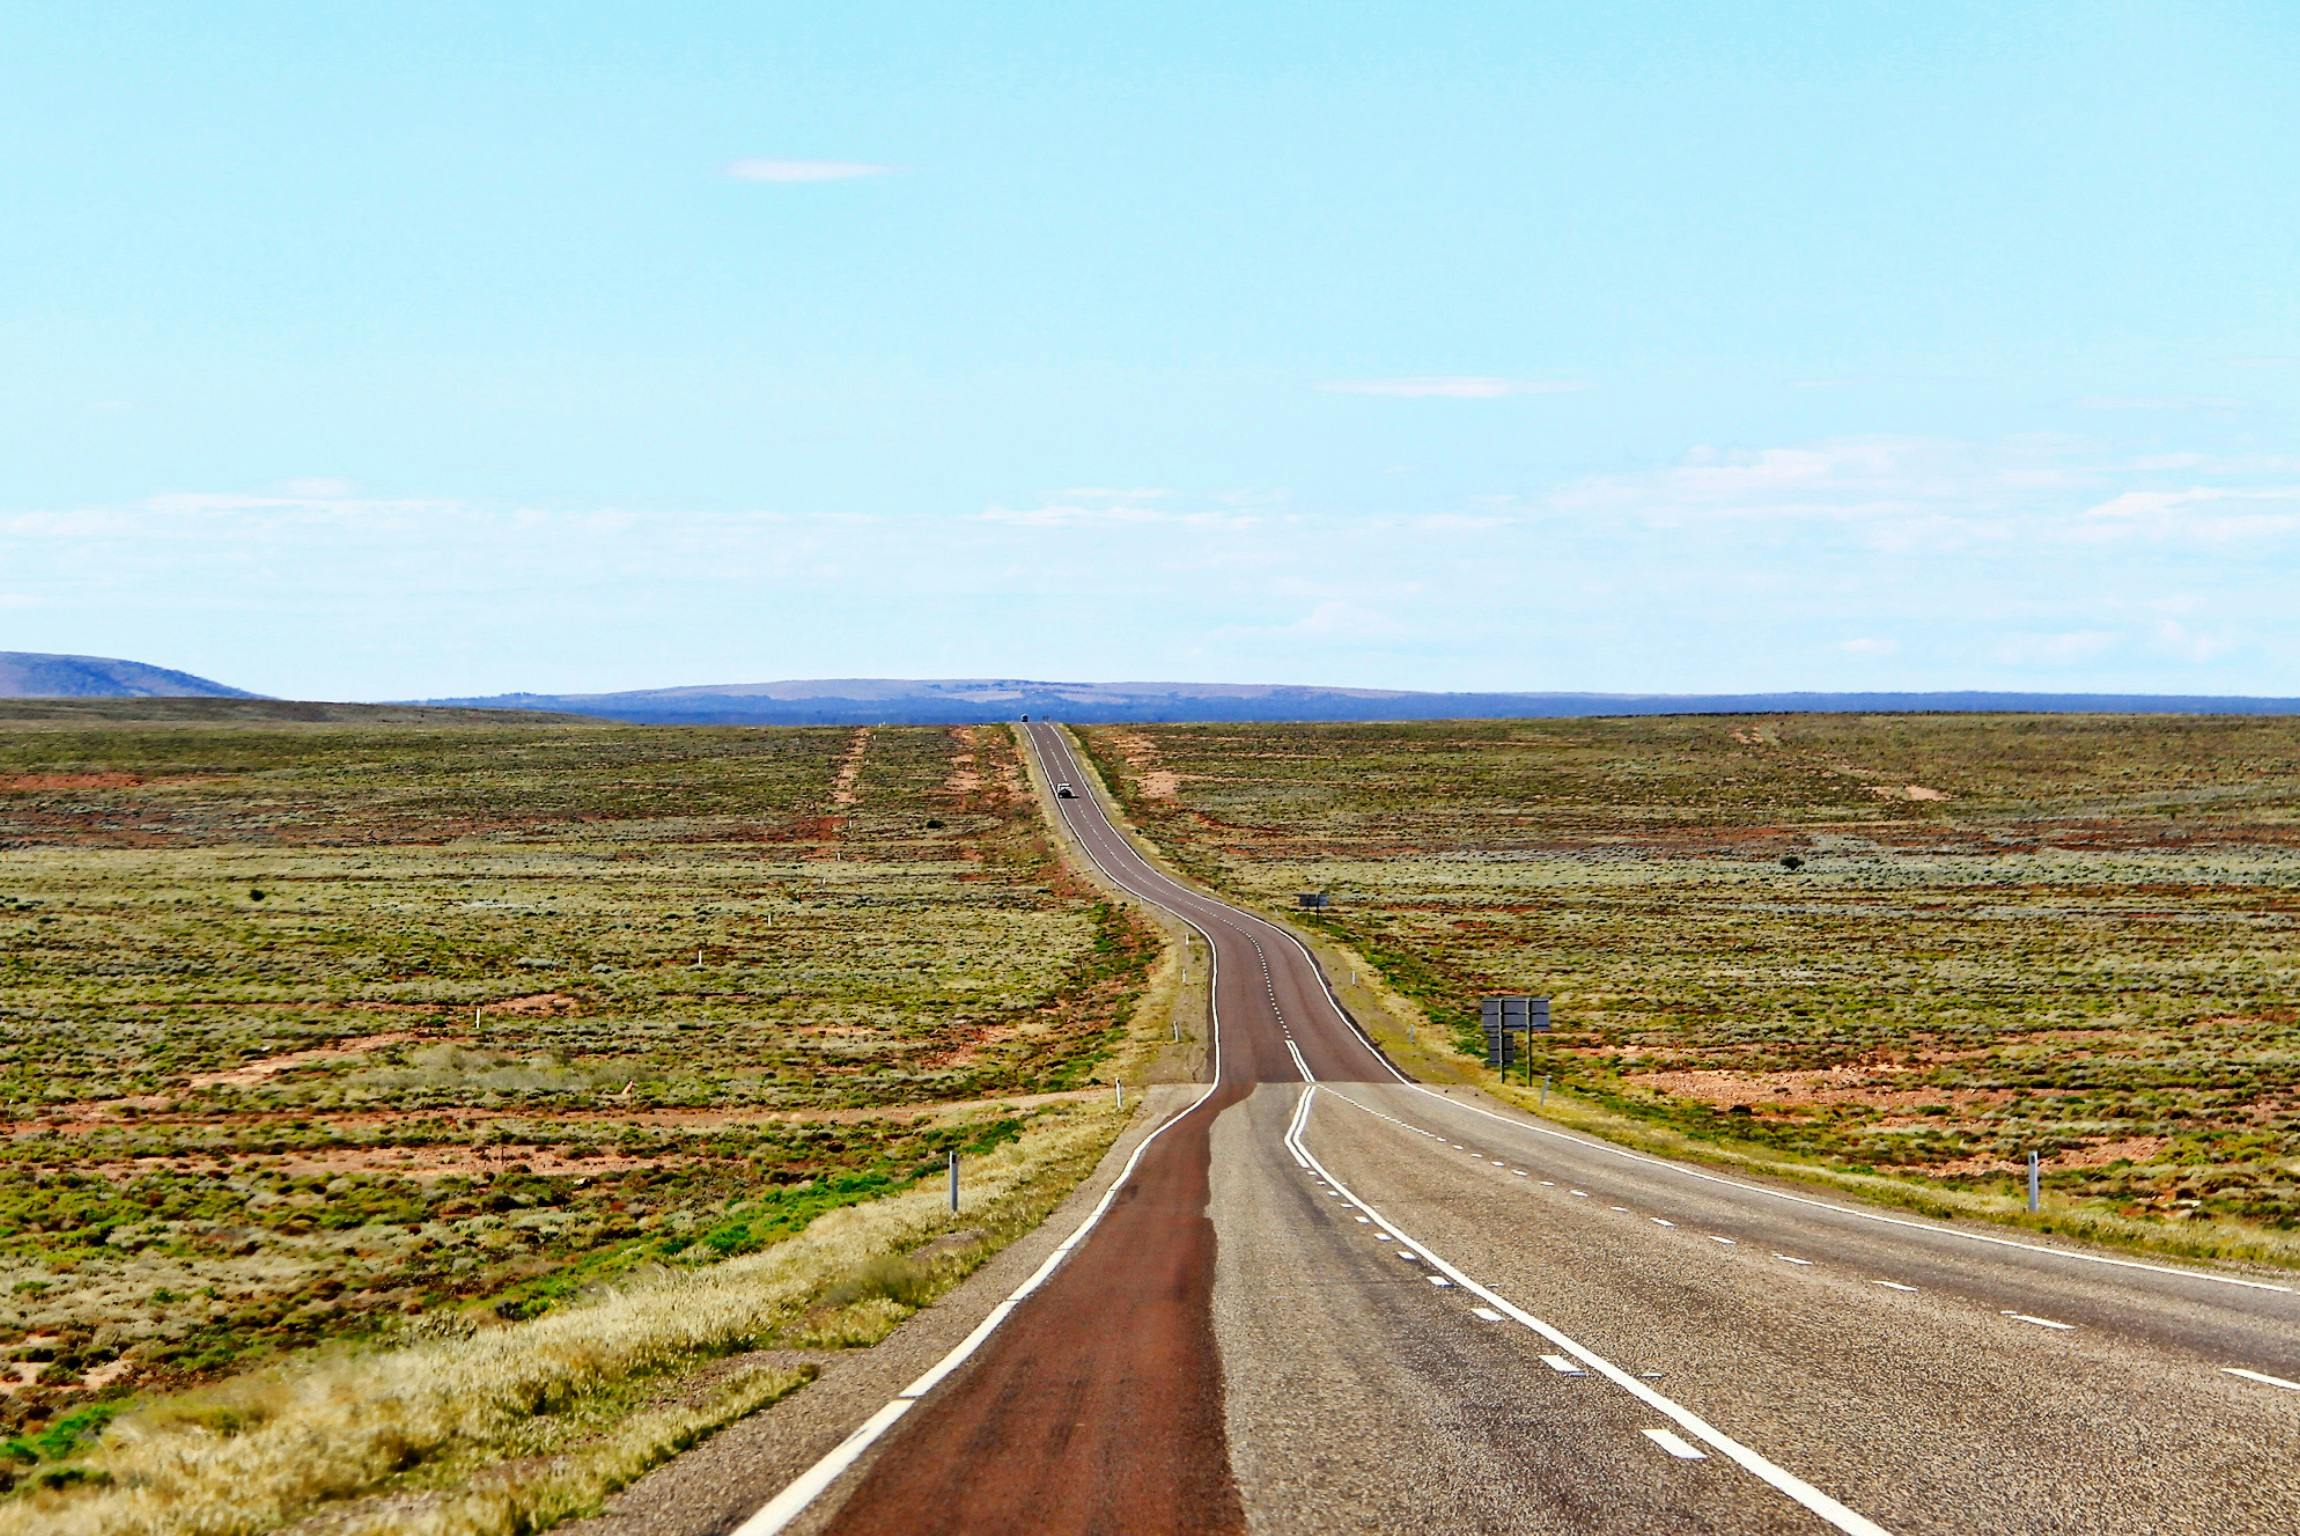 flat outback scene with grass covering the ground and low mountains in the background. A paved road cuts through the landscape